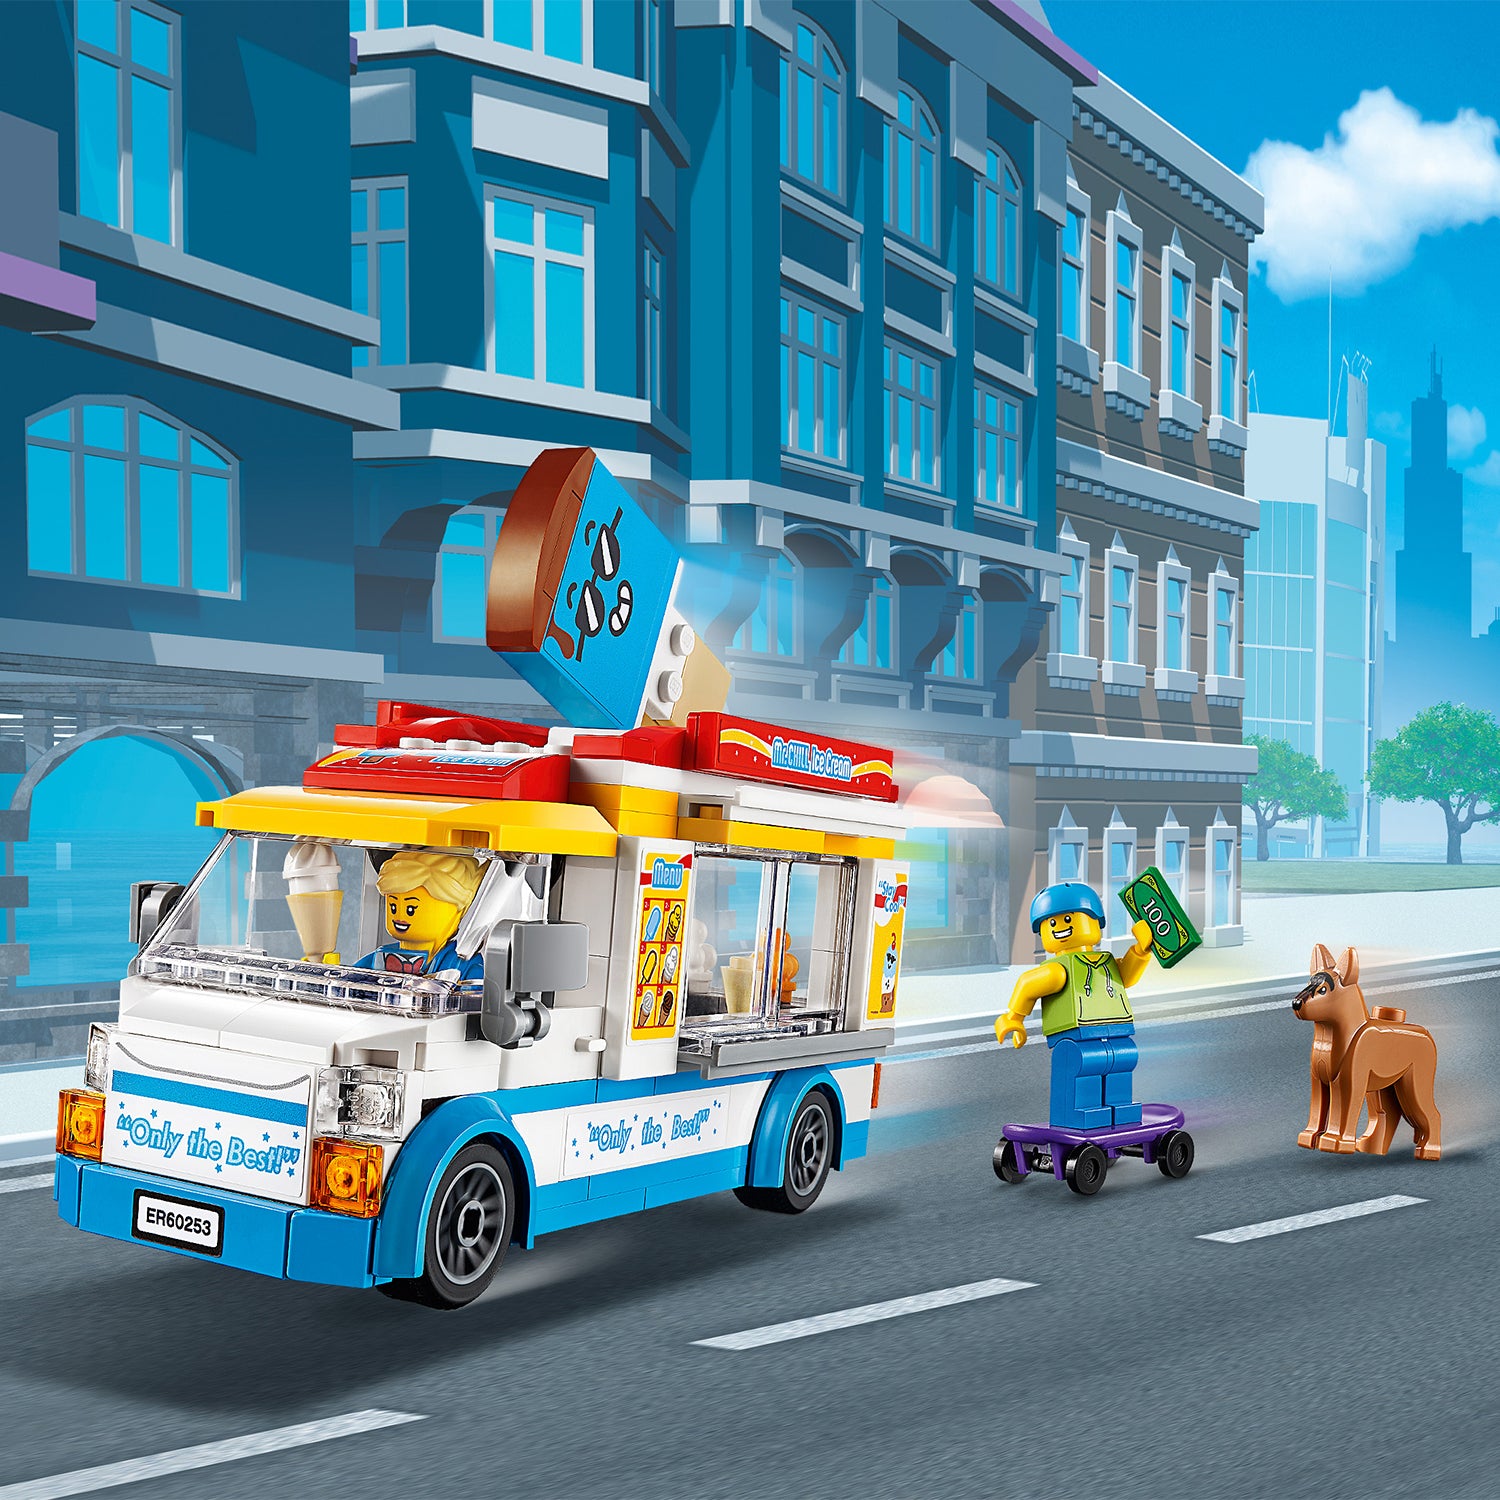 LEGO® City Great Vehicles Ice Cream Truck Toy 60253 Default Title